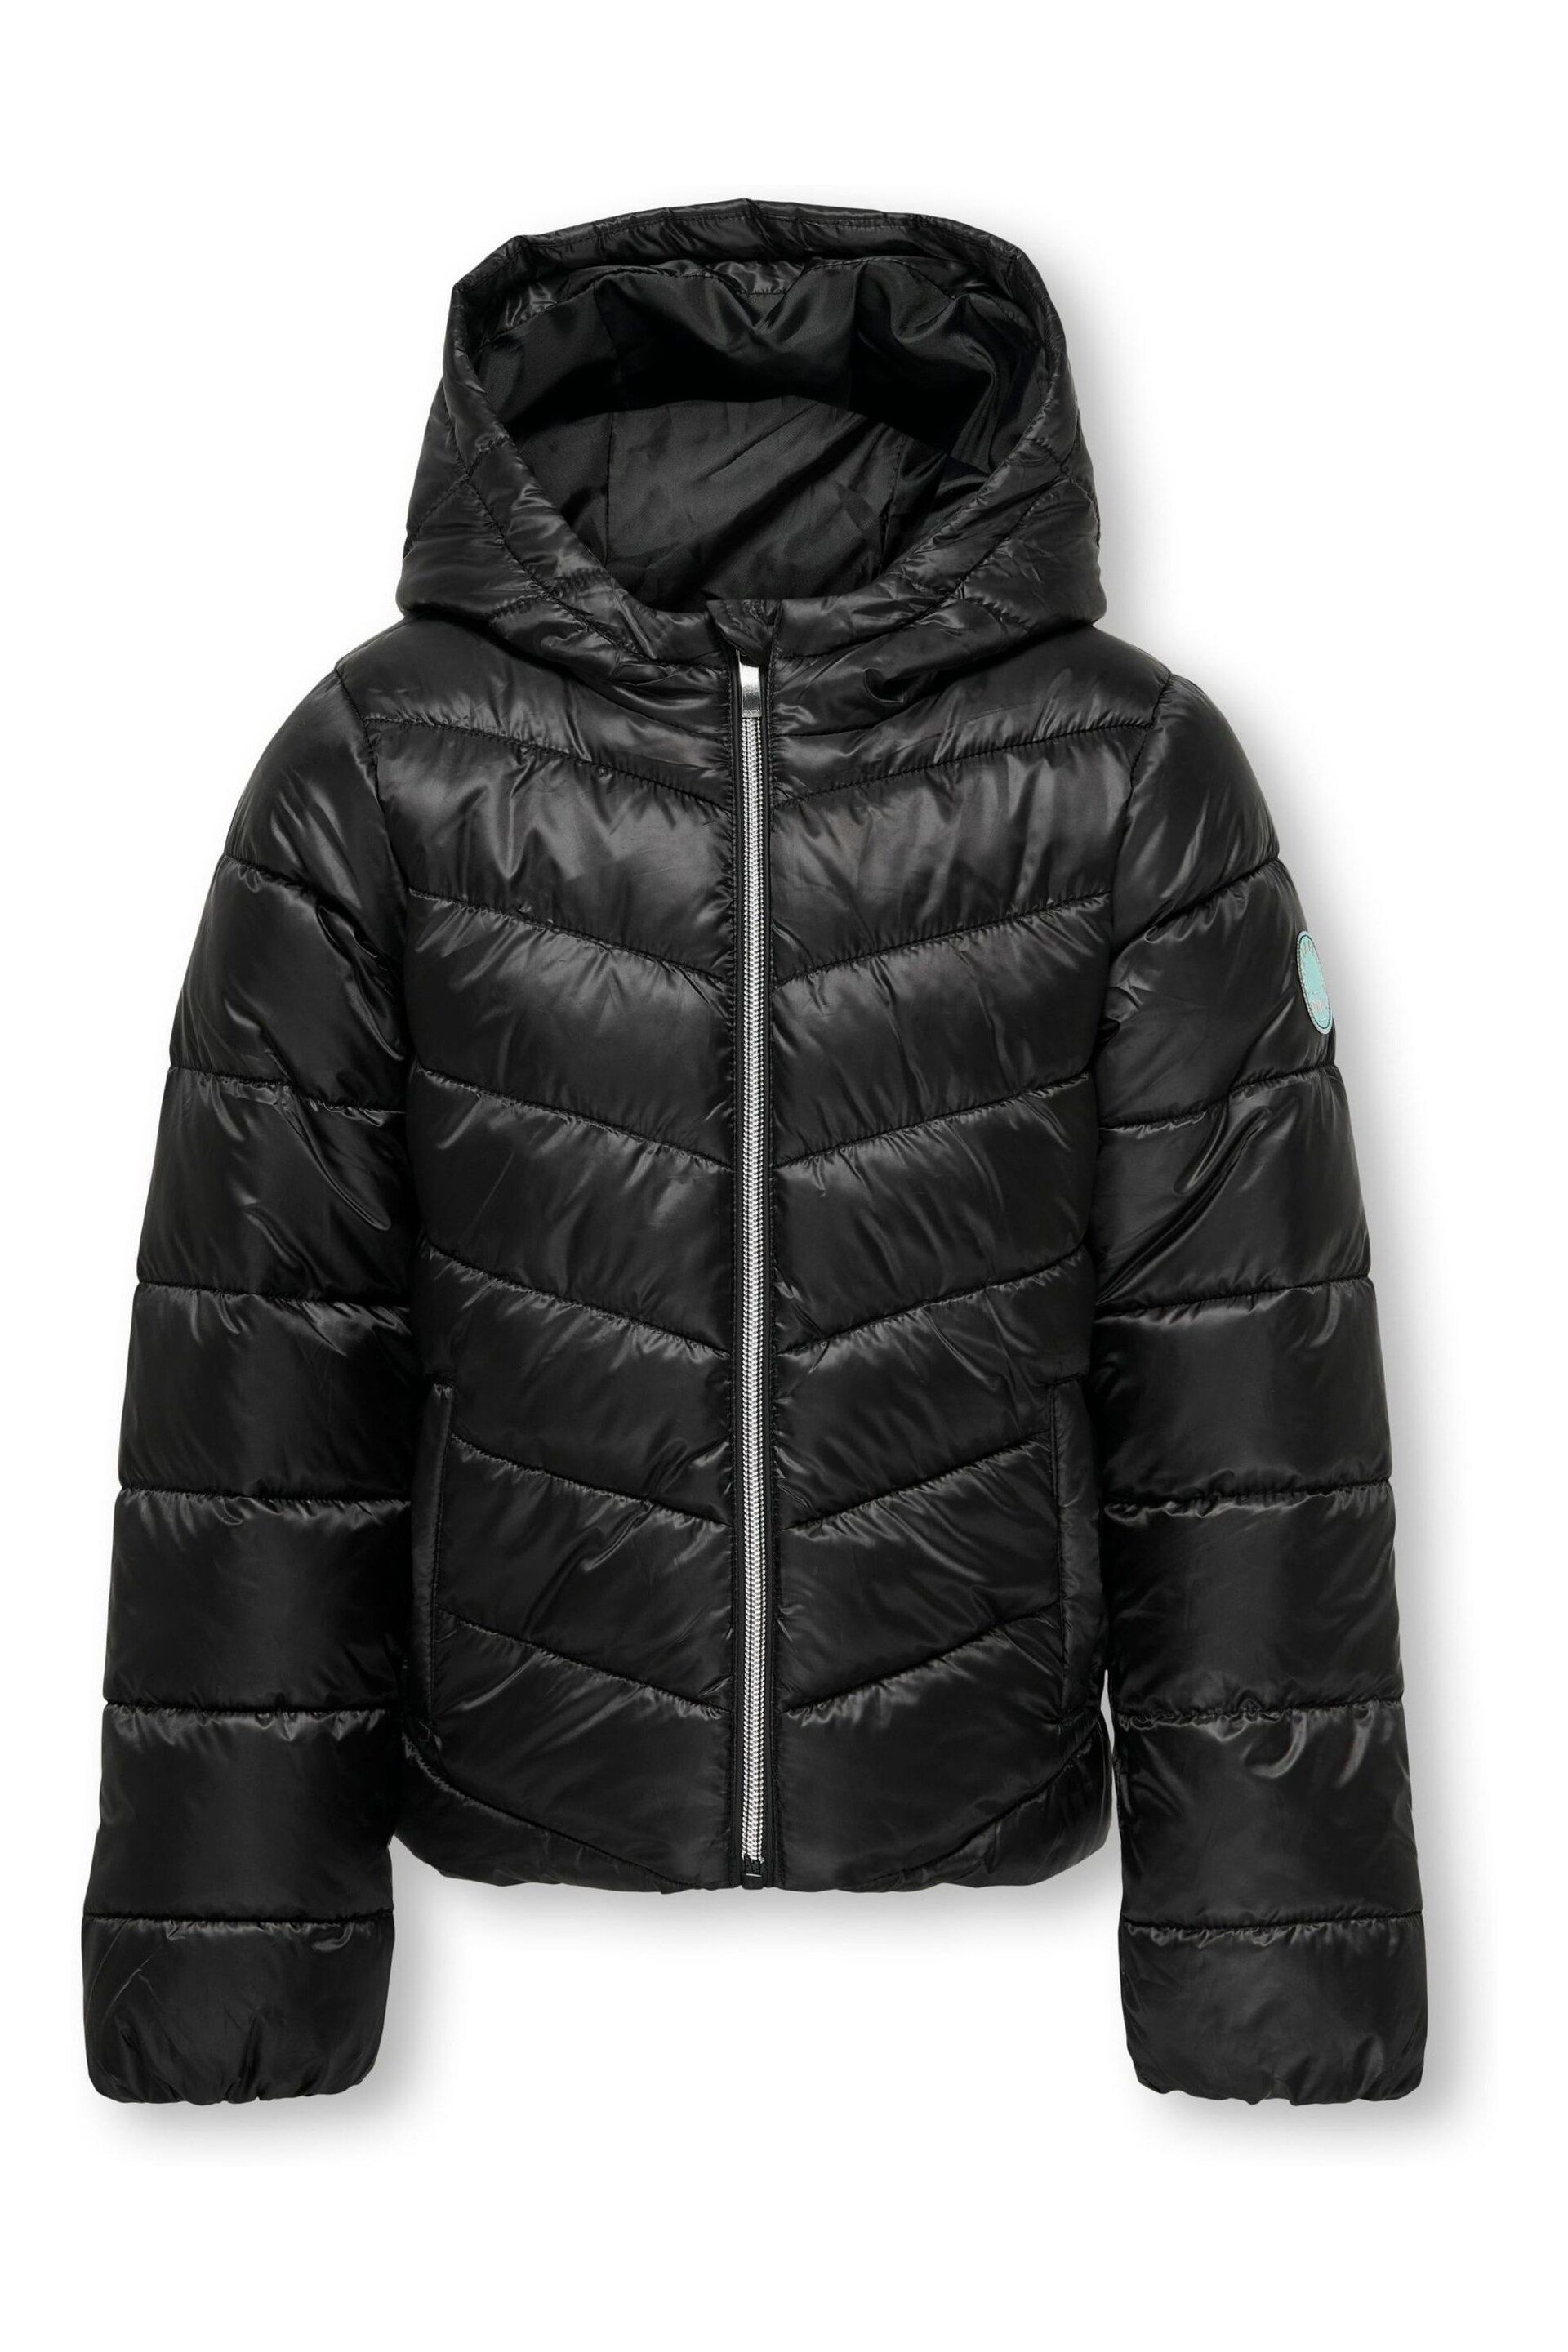 ONLY KIDS Zip Up Hooded Coat - Image 1 of 2